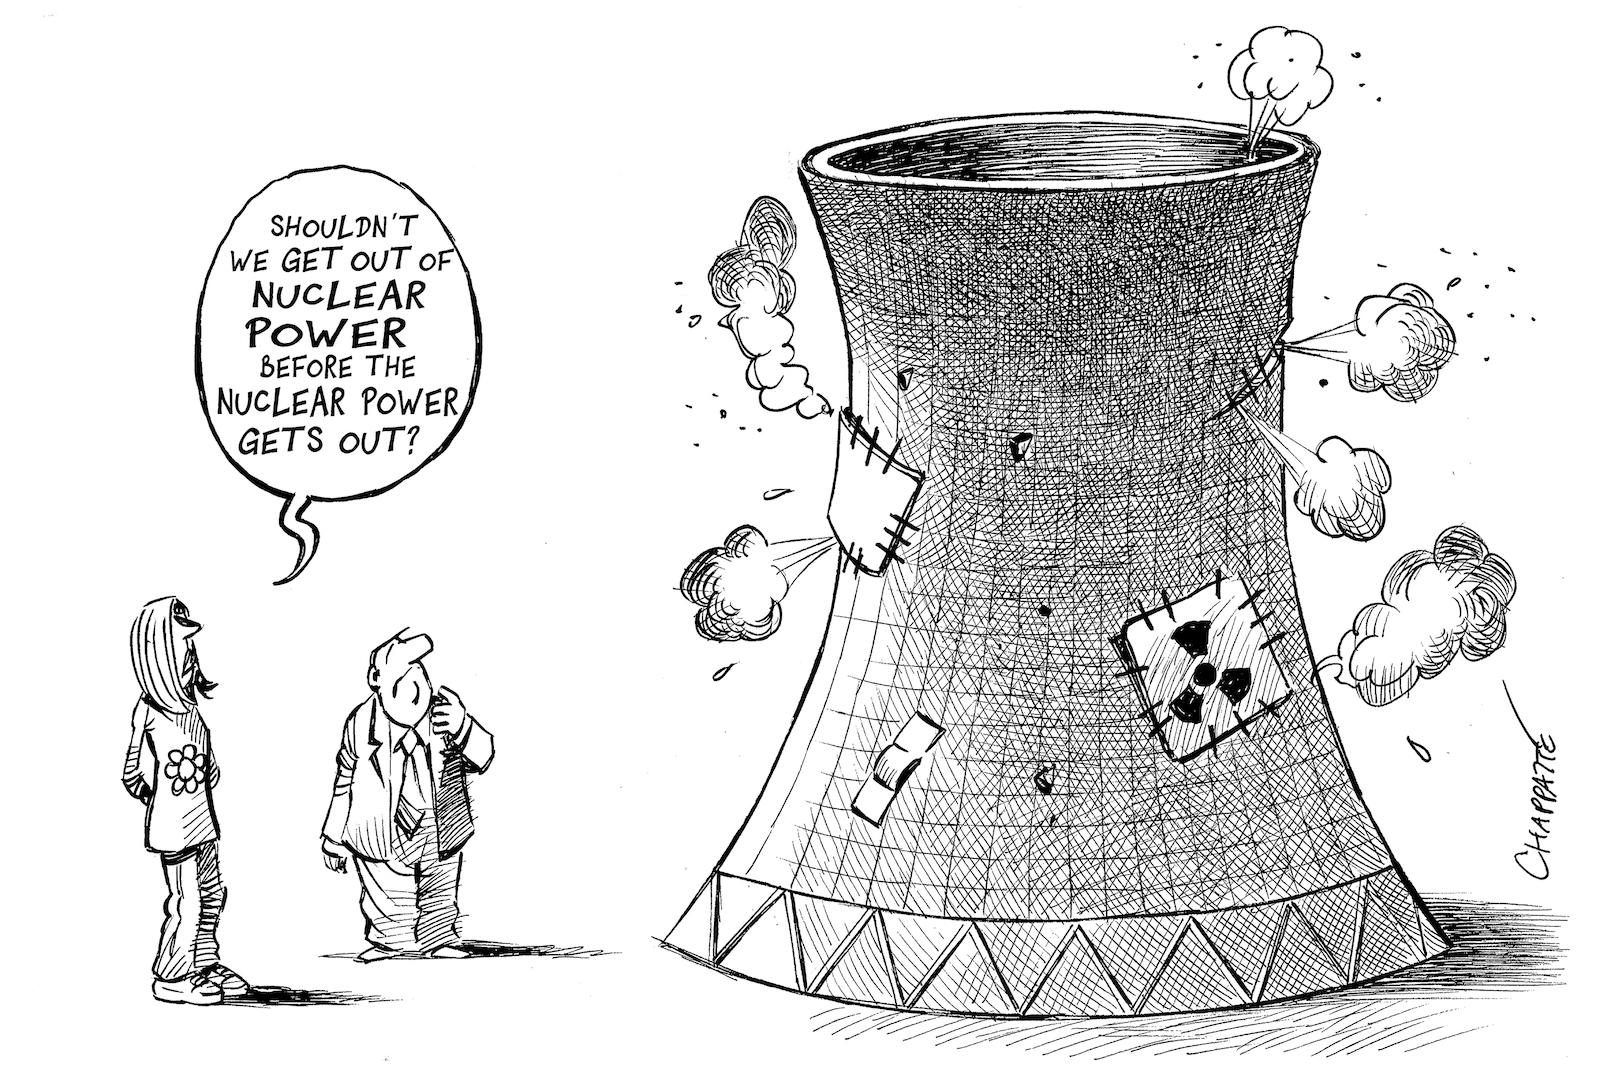 Time to phase out nuclear power?